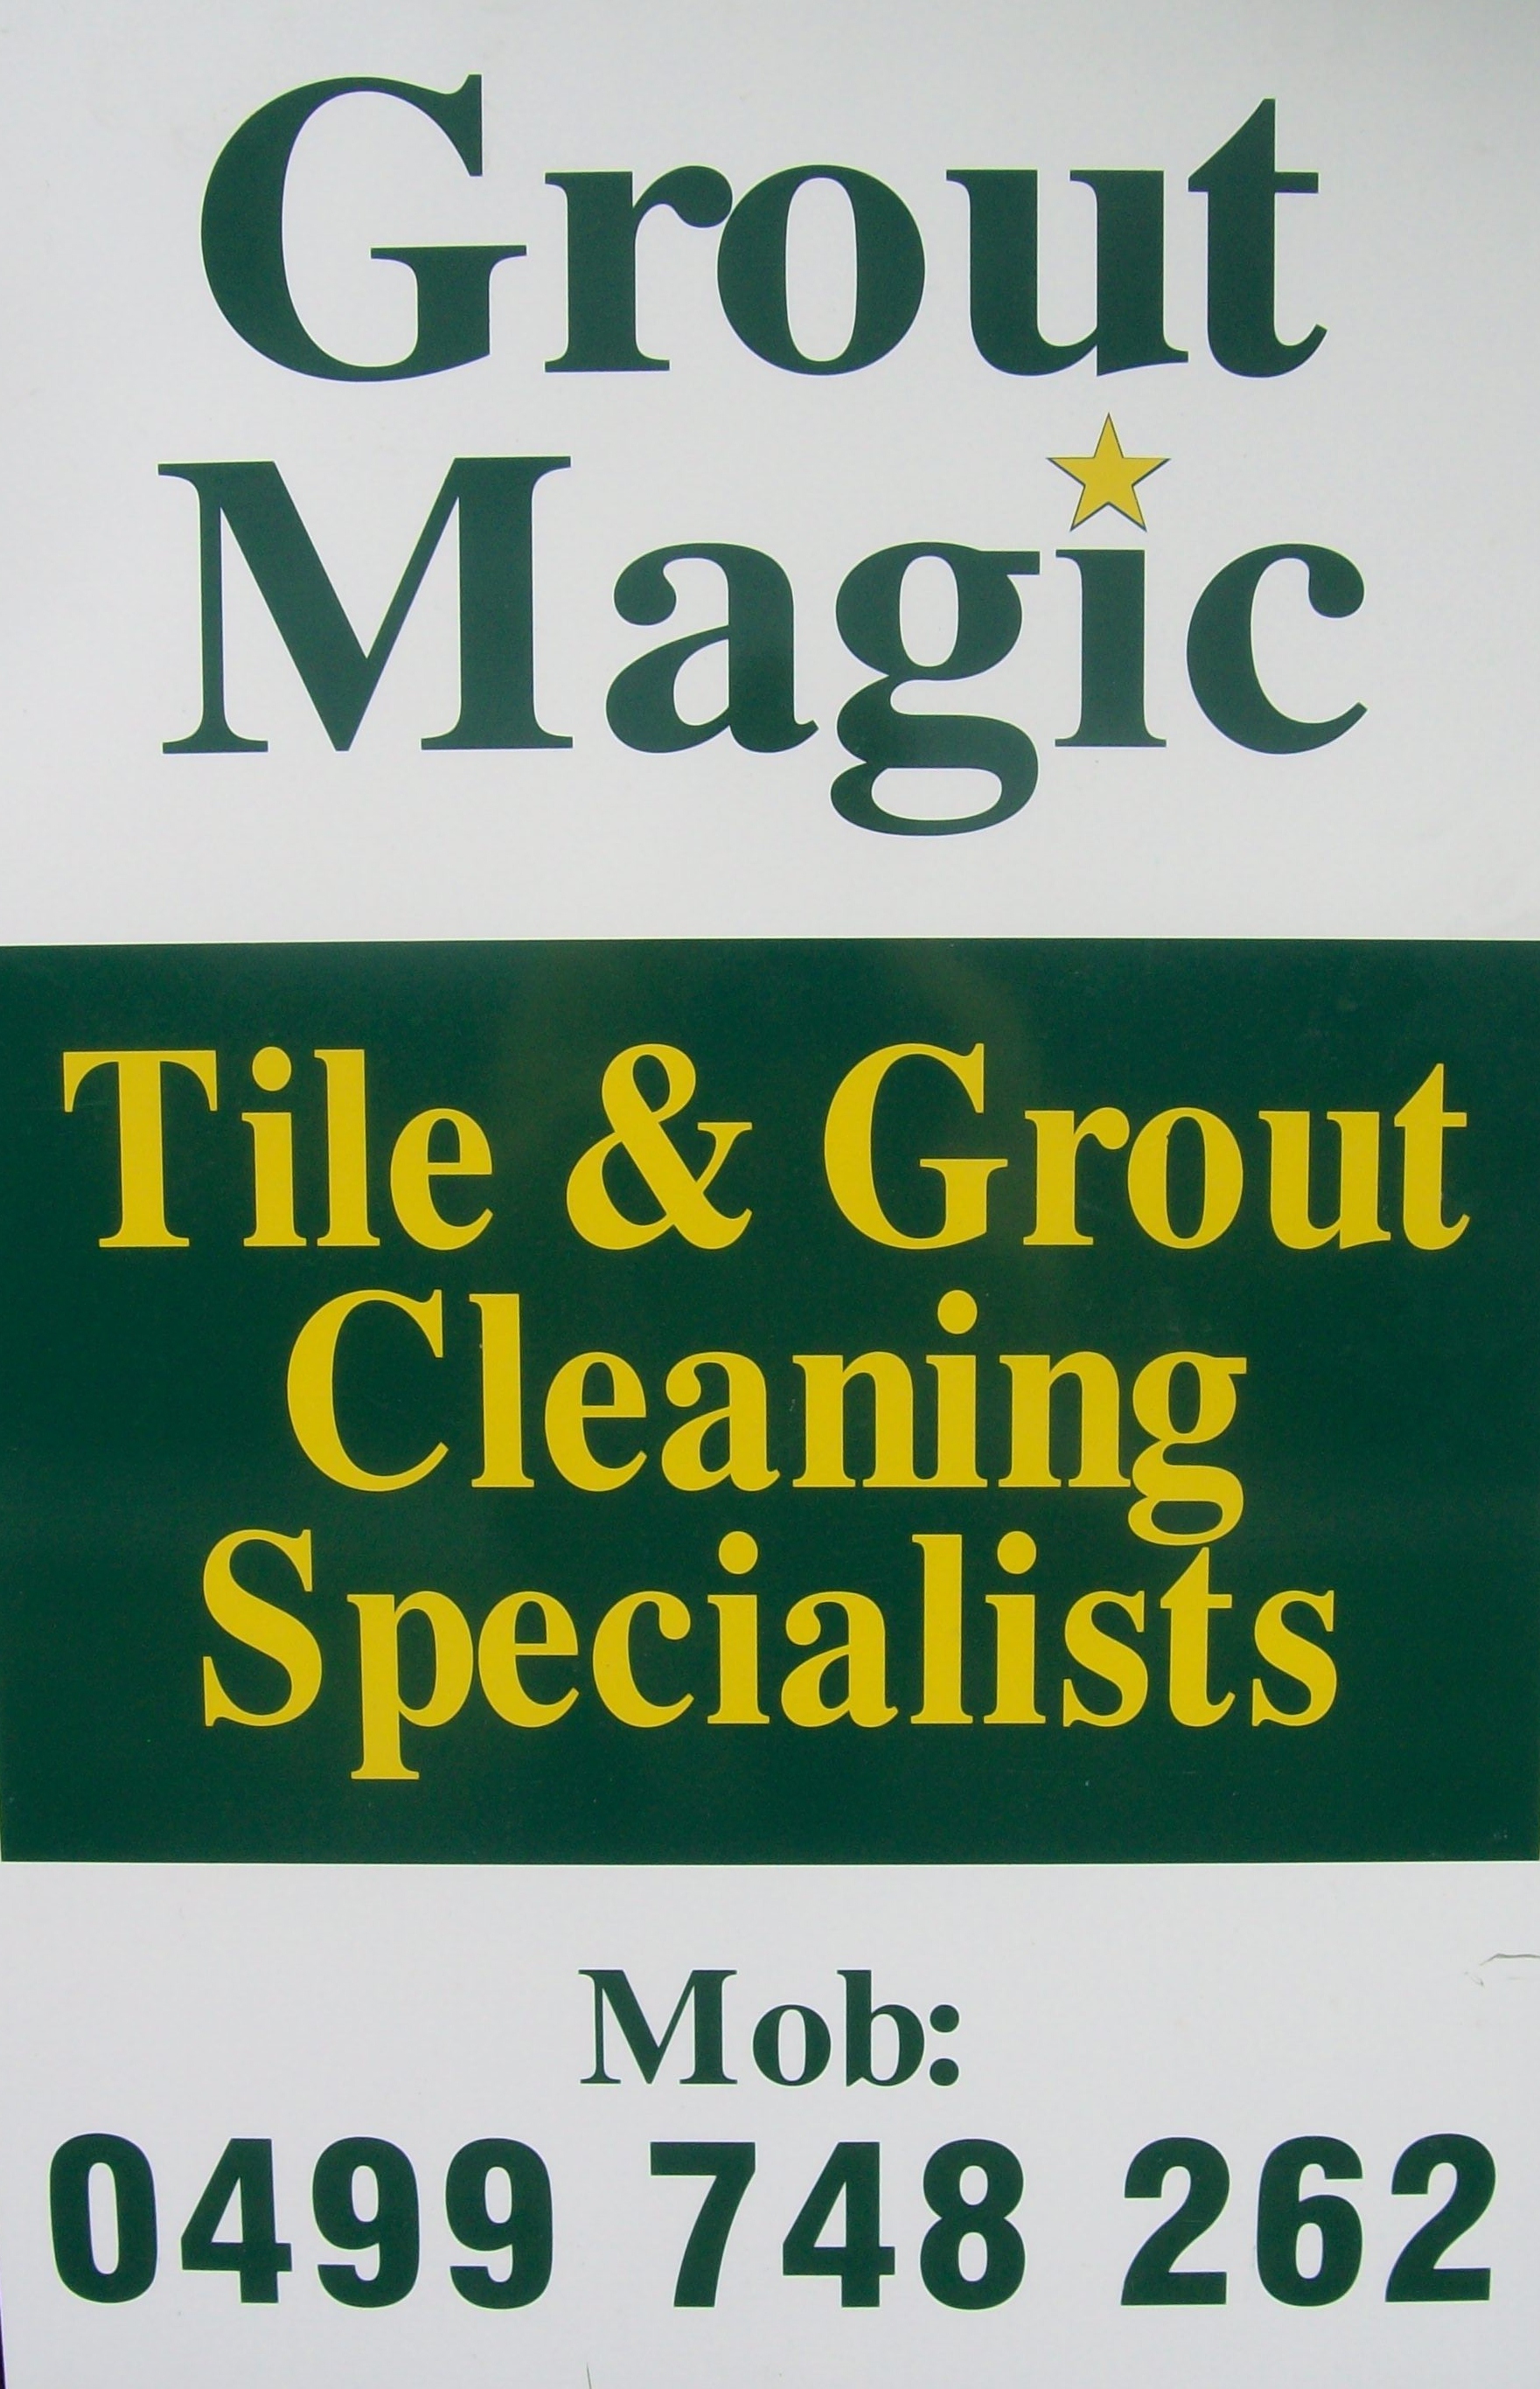 Grout Magic